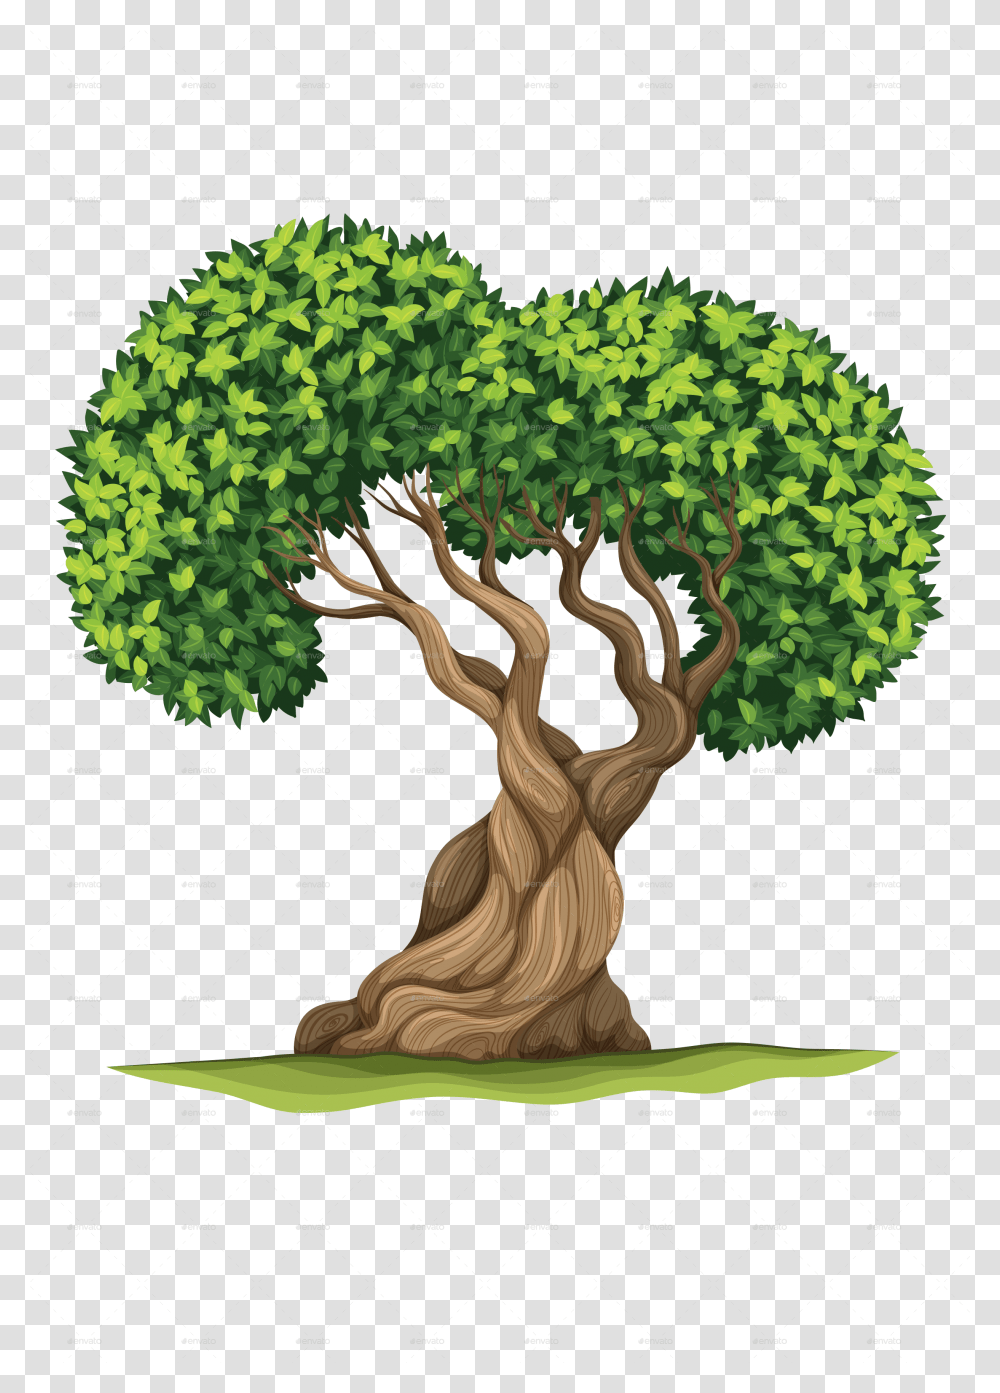 Trees Vectors Tree Leaves In Different Colours, Potted Plant, Vase, Jar, Pottery Transparent Png